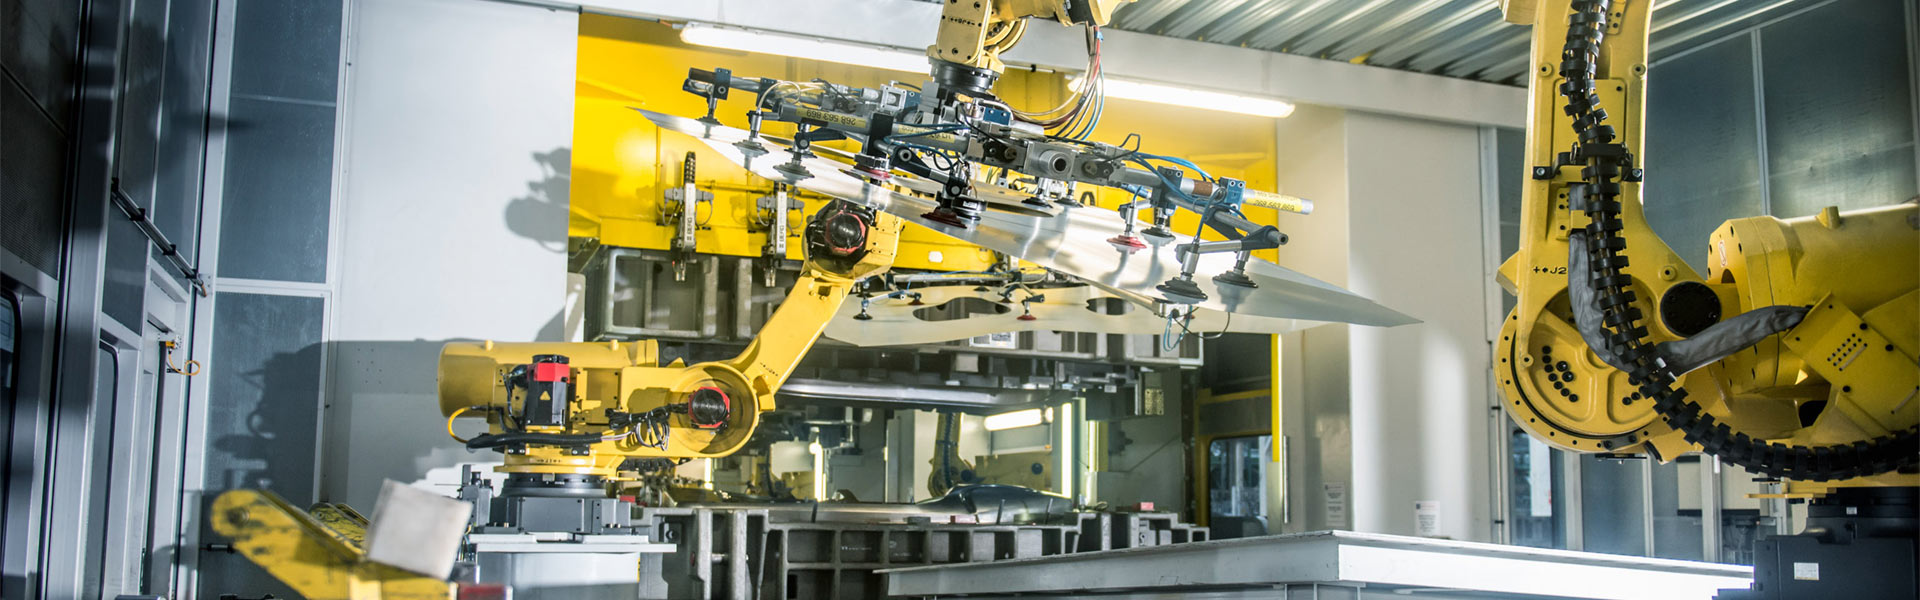 SAP Named a Leader in IDC MarketScape for Industrial IoT Platforms in Manufacturing